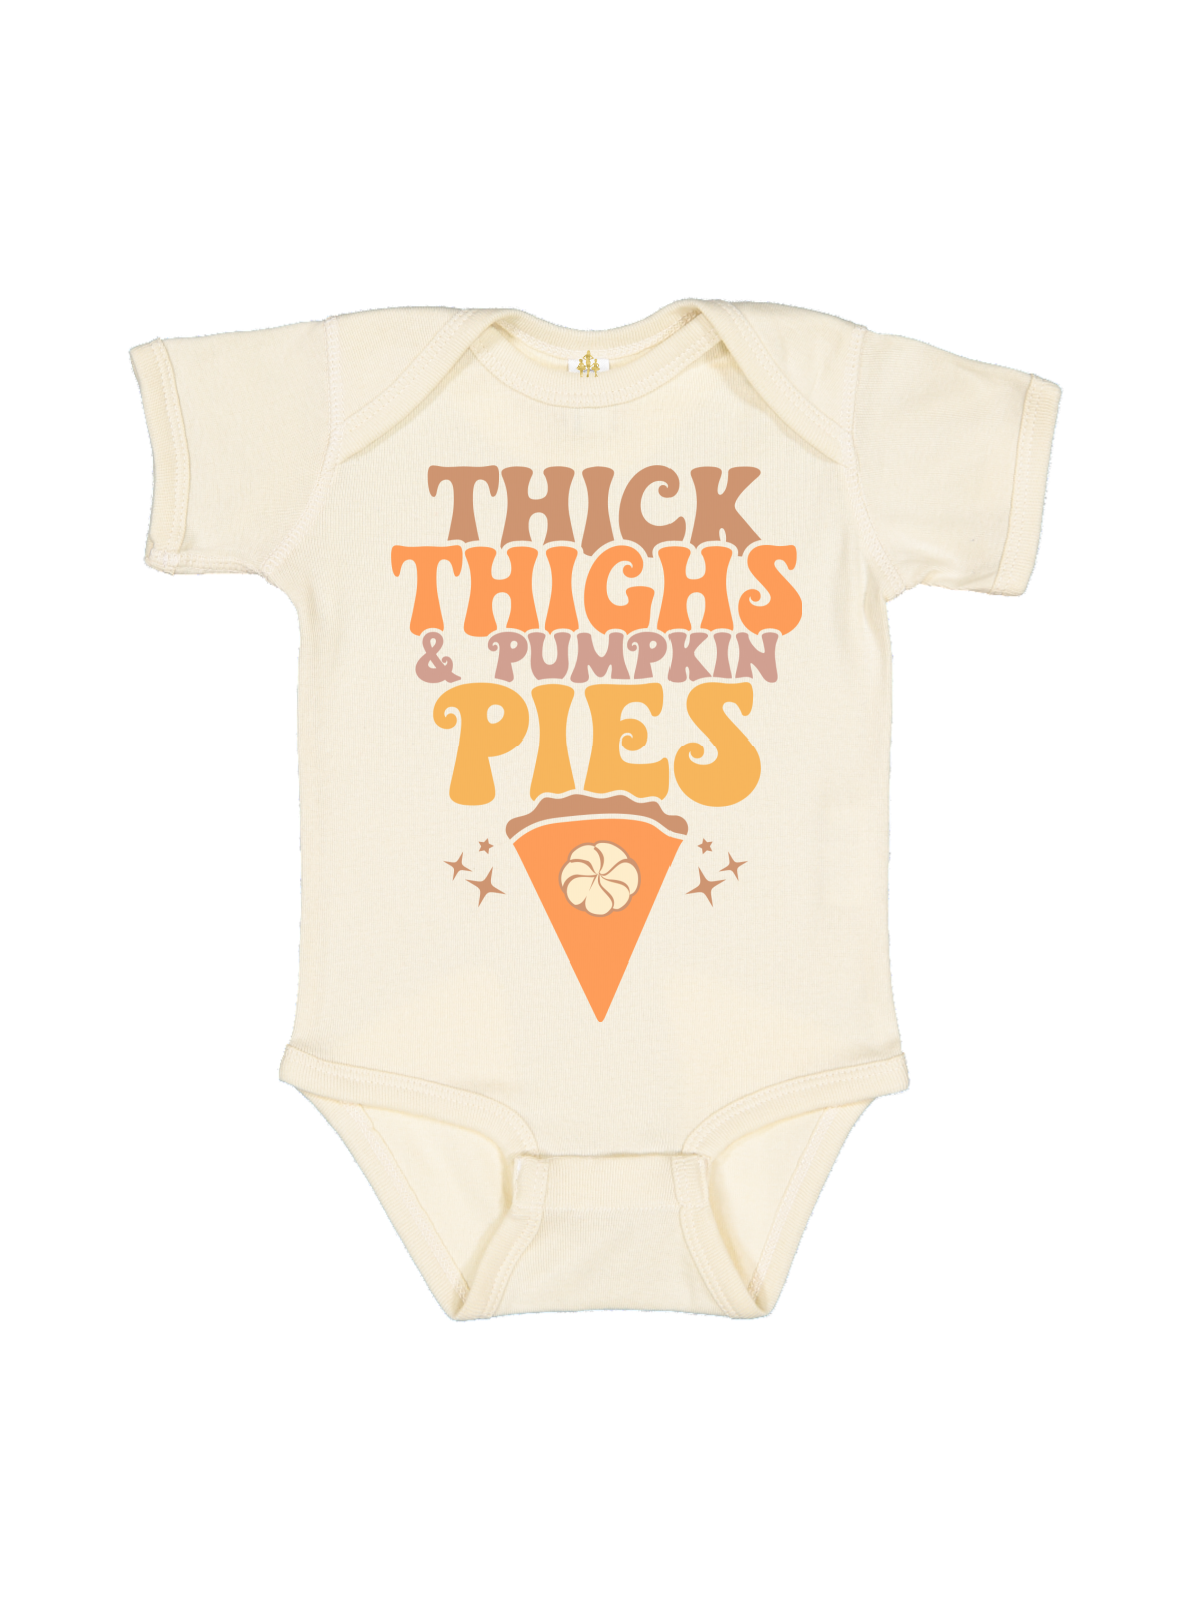 Thick Thighs & Pumpkin Pies Baby Bodysuit in Natural